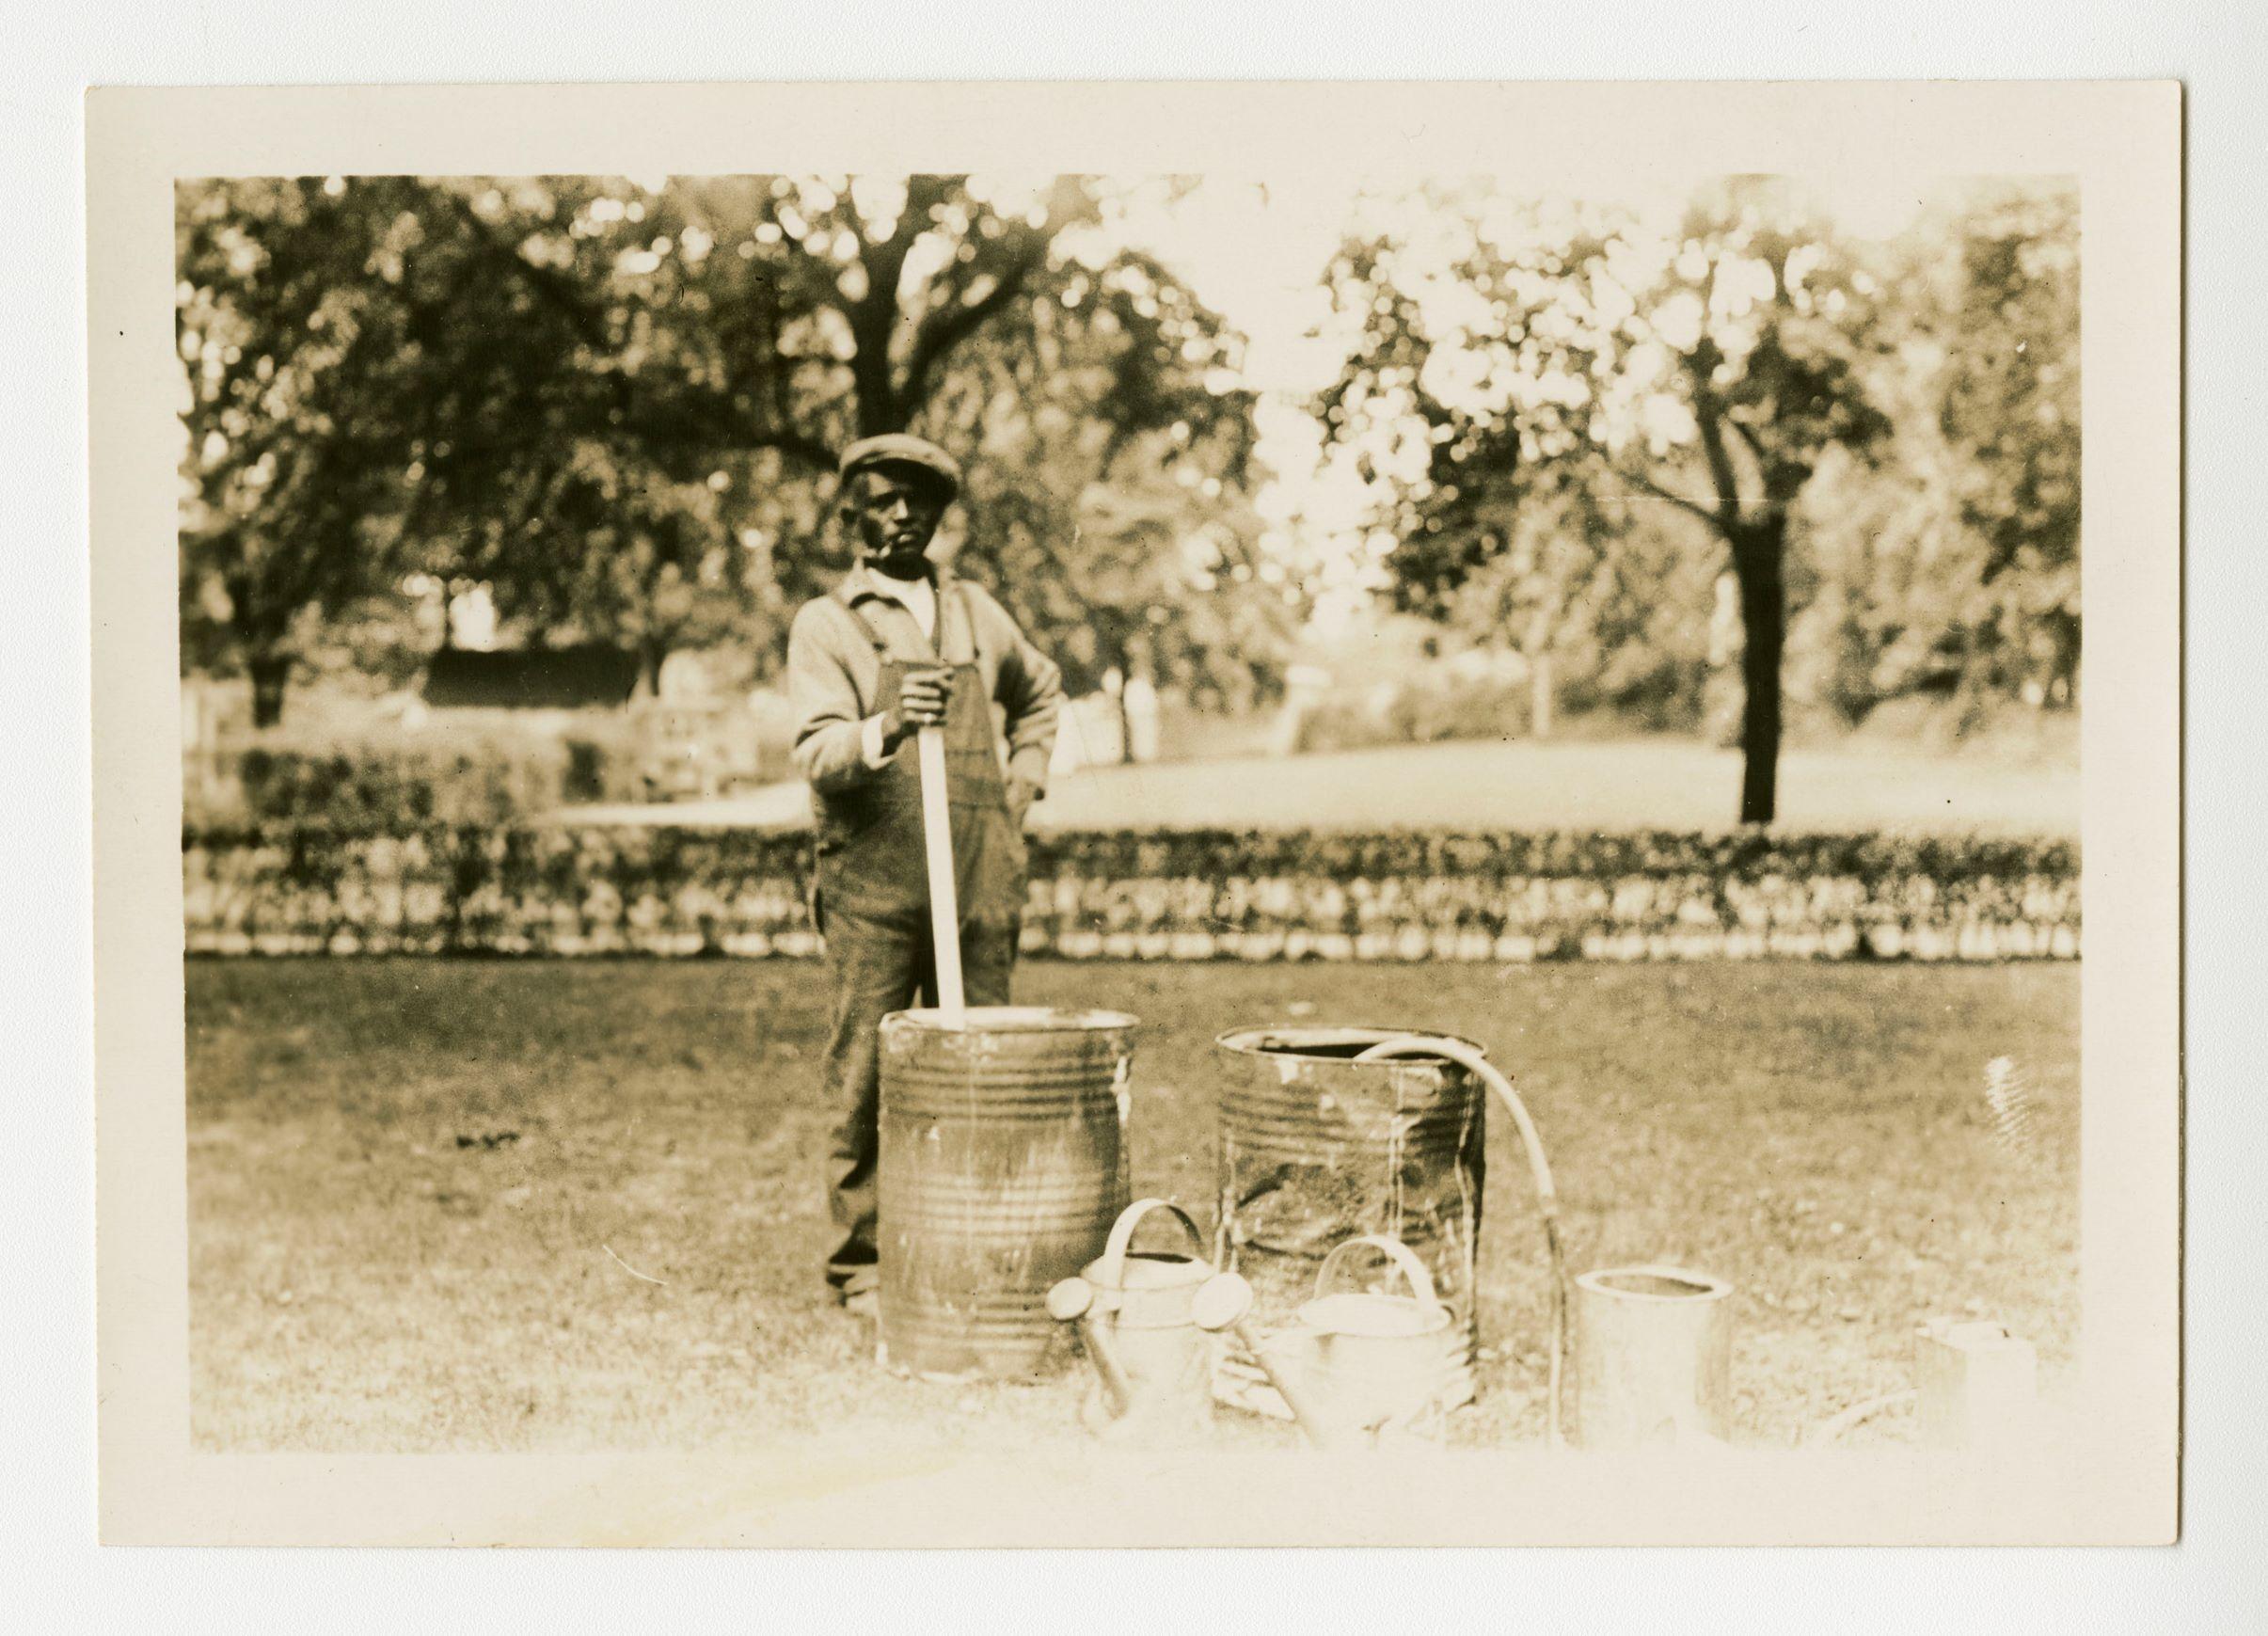 Black man standing with barrels and watering cans